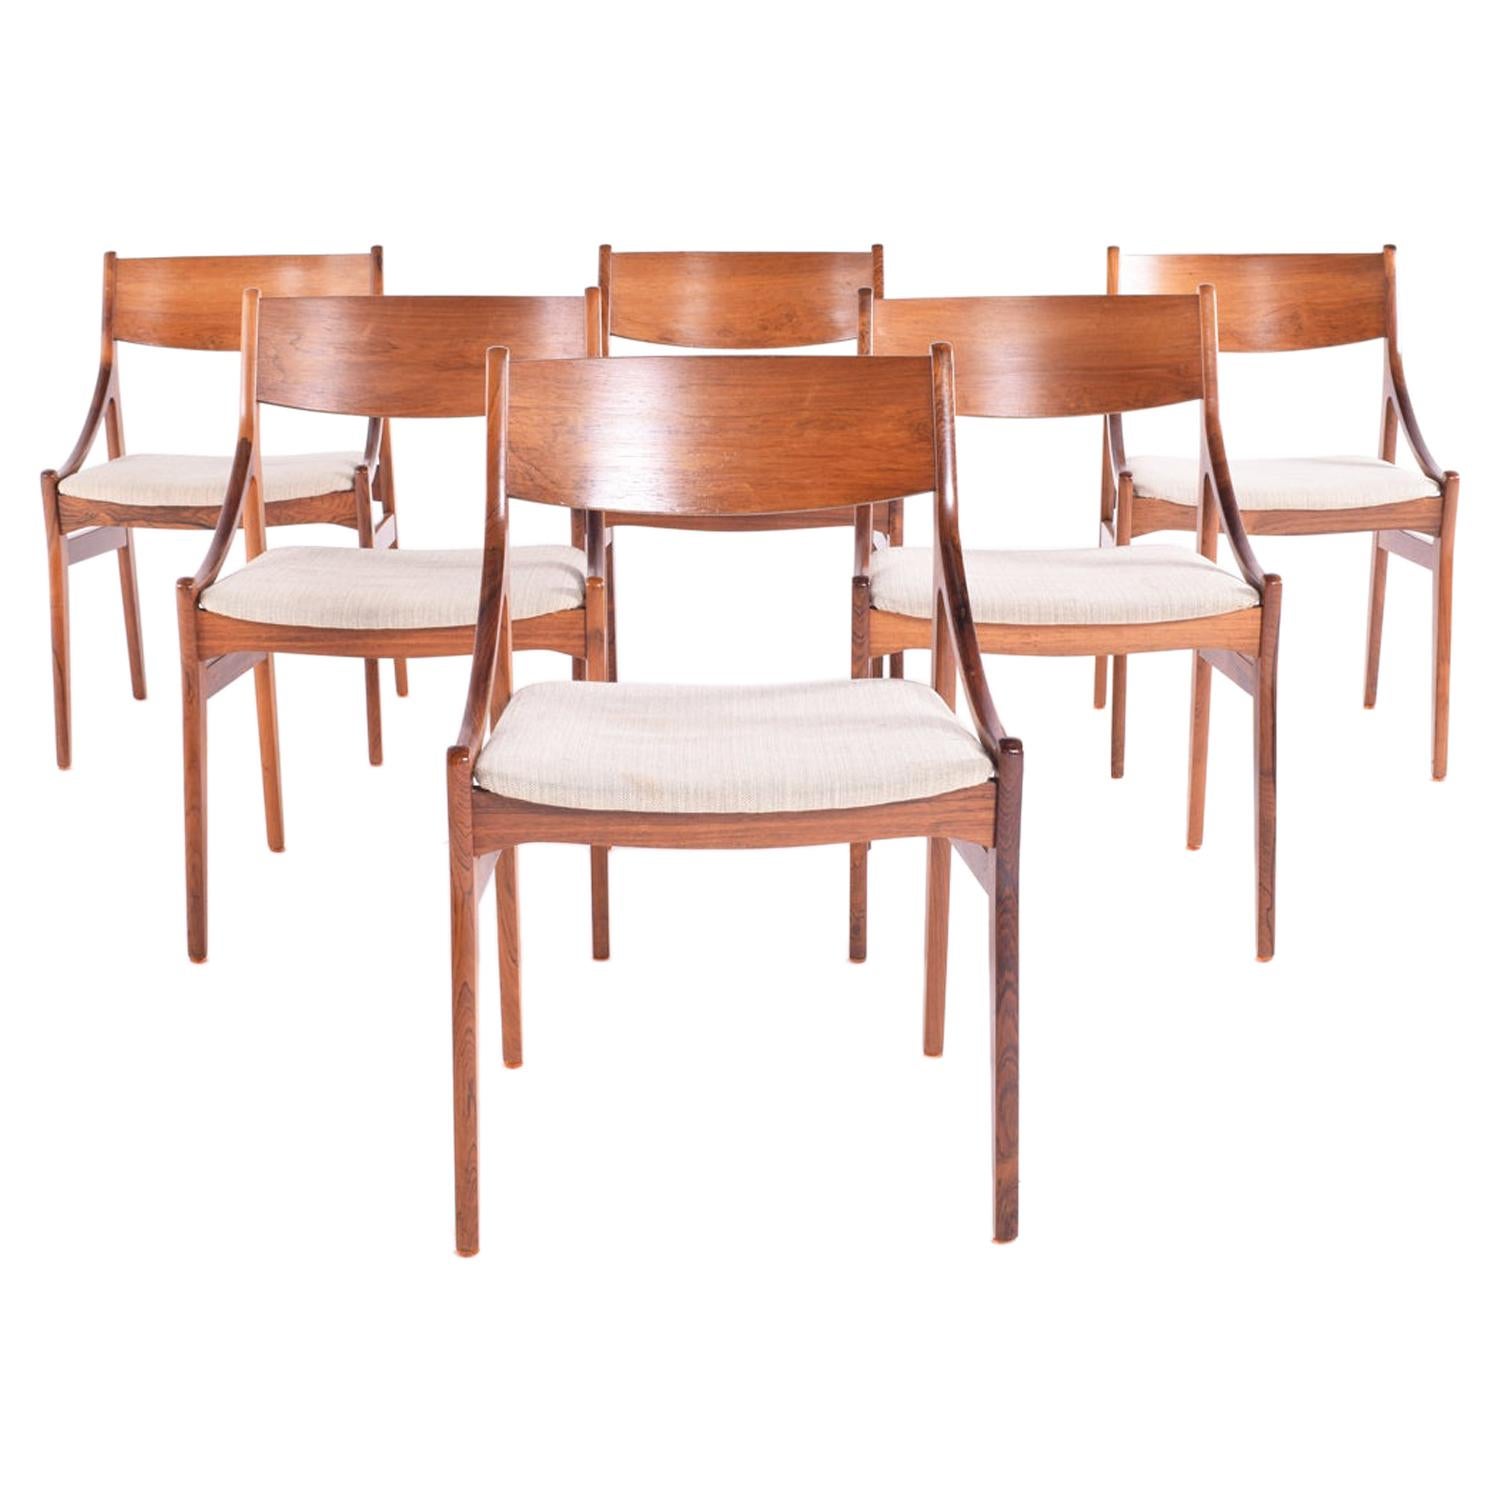 Midcentury Rosewood Dinning Chairs by Vestervig Erikson for Brdr. Tromborg